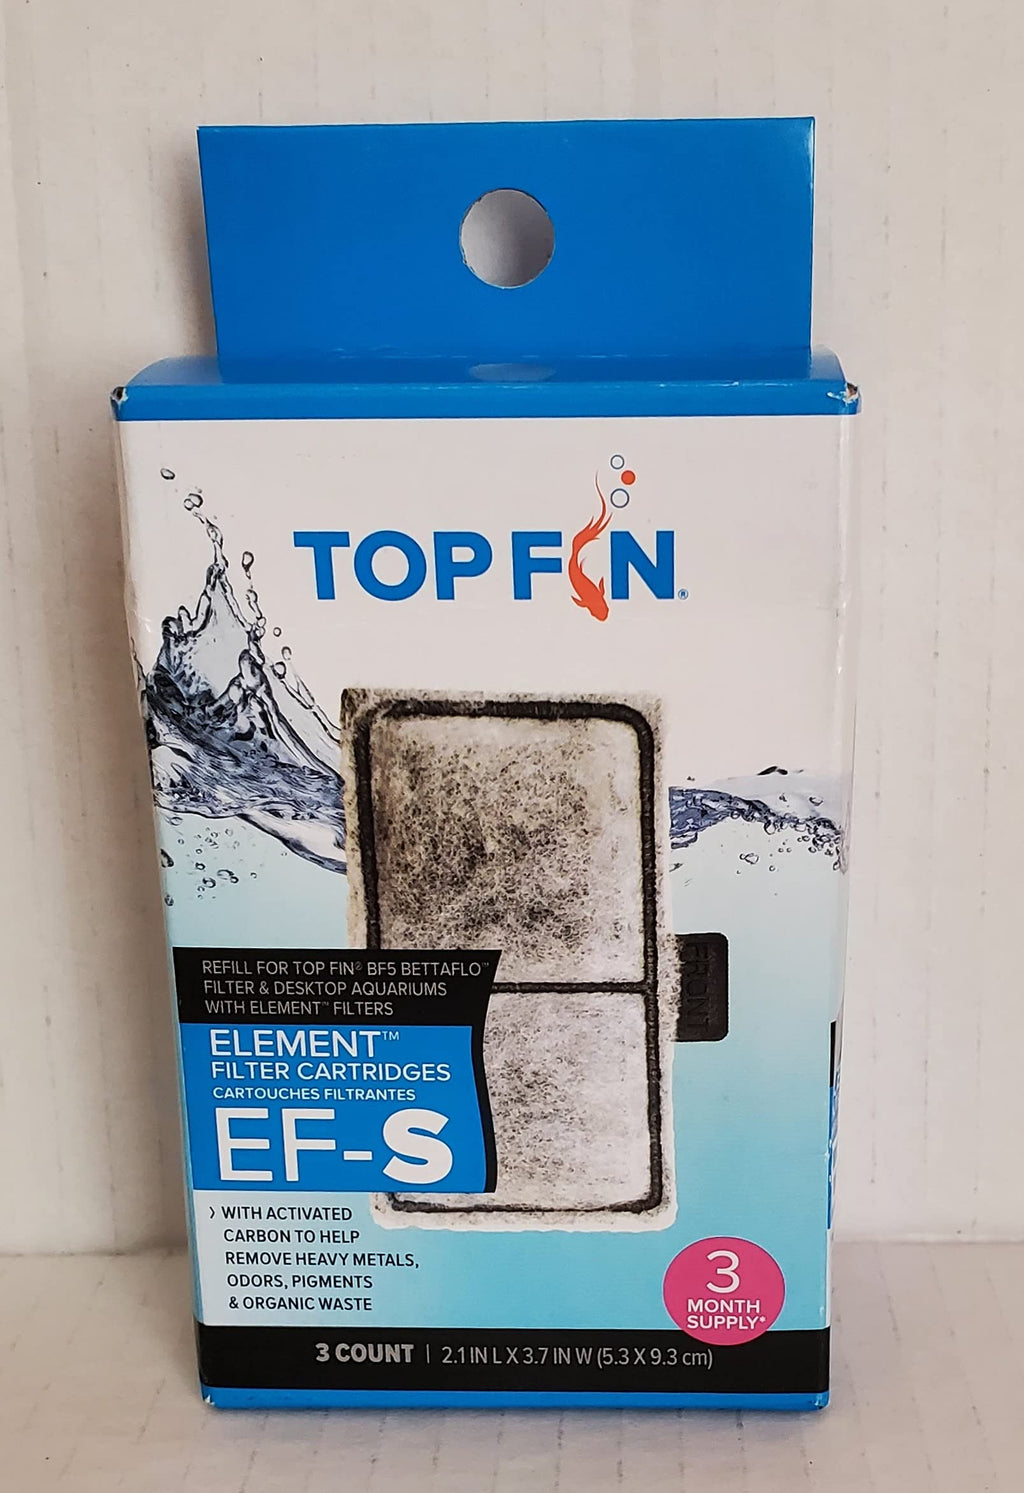 Top Fin EF-S Element Filter Cartridge 3 Month Supply 2.1 in X 3.7 in - PawsPlanet Australia